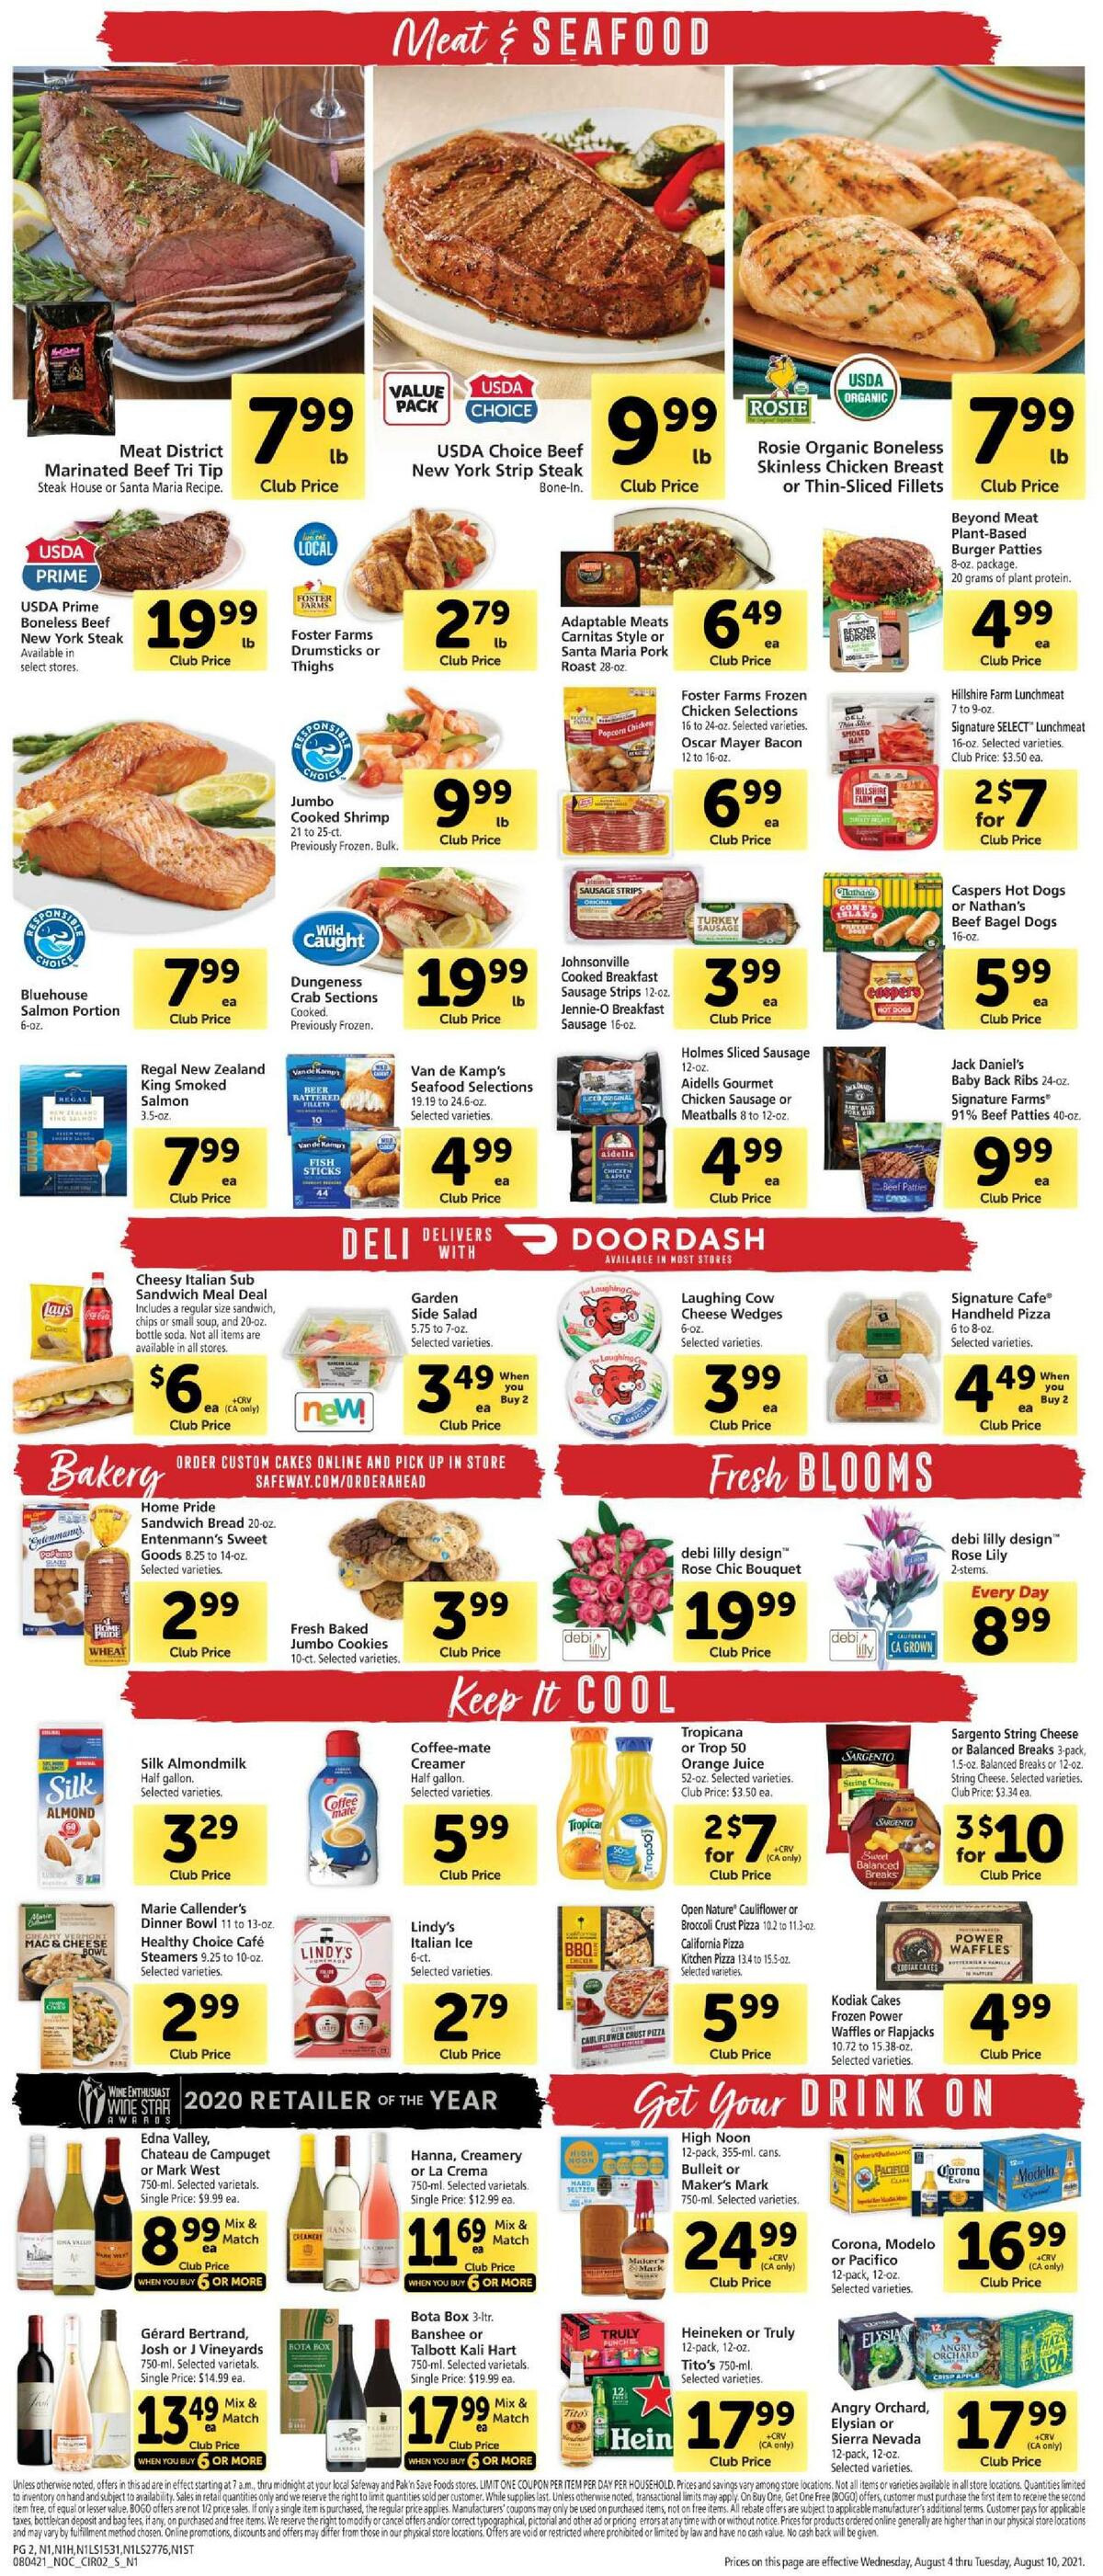 Safeway Weekly Ad from August 4